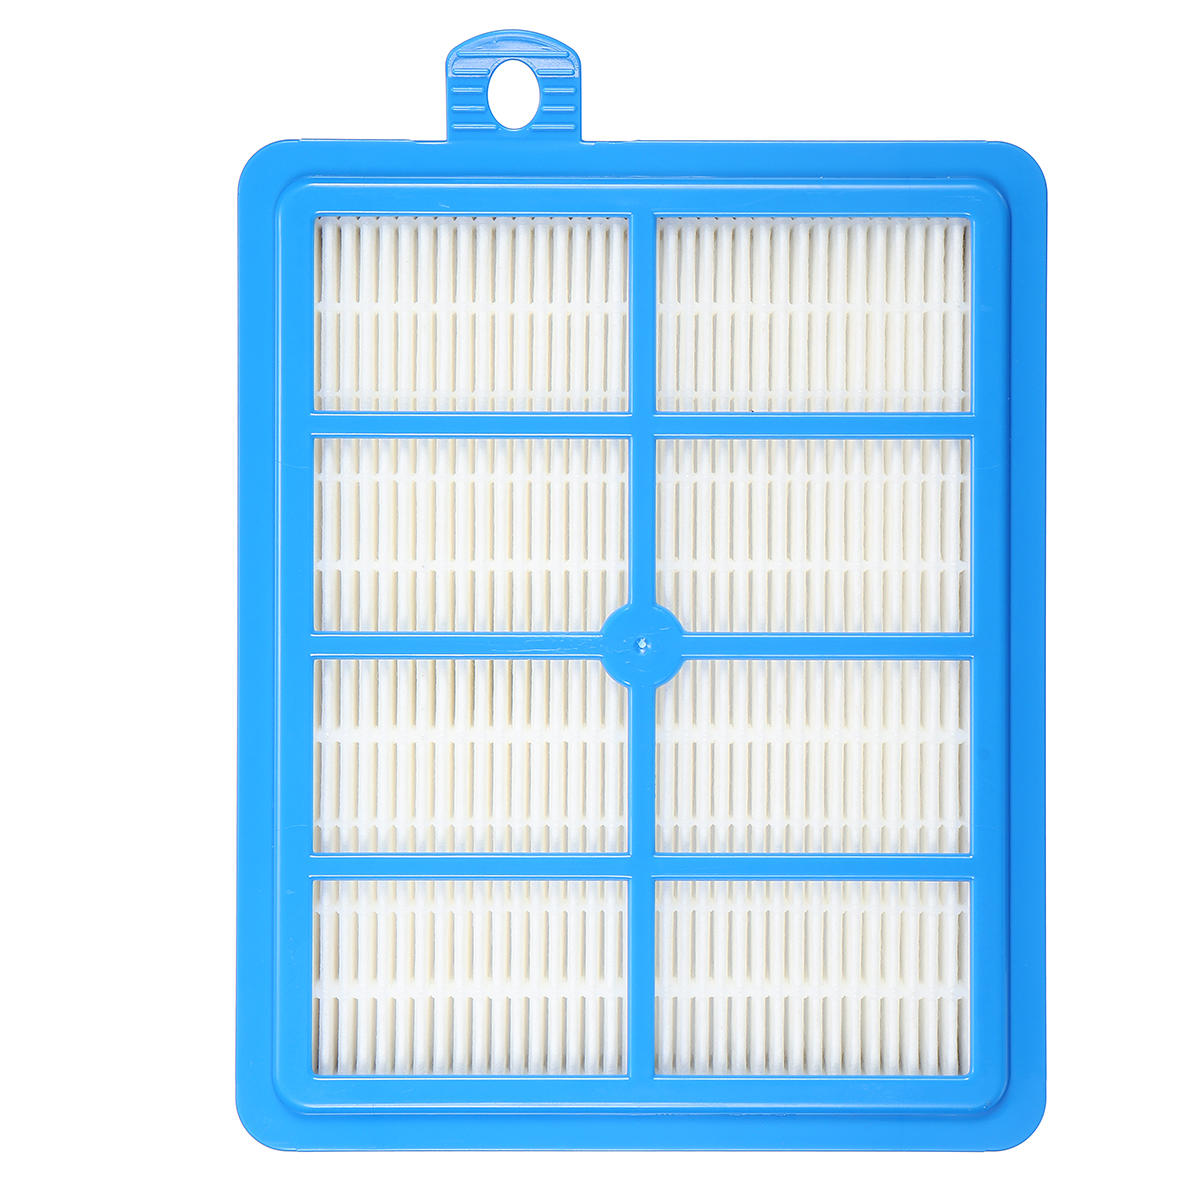 Hepa Filter Accessory For ELECTROLUX H13 Vacuum Cleaner